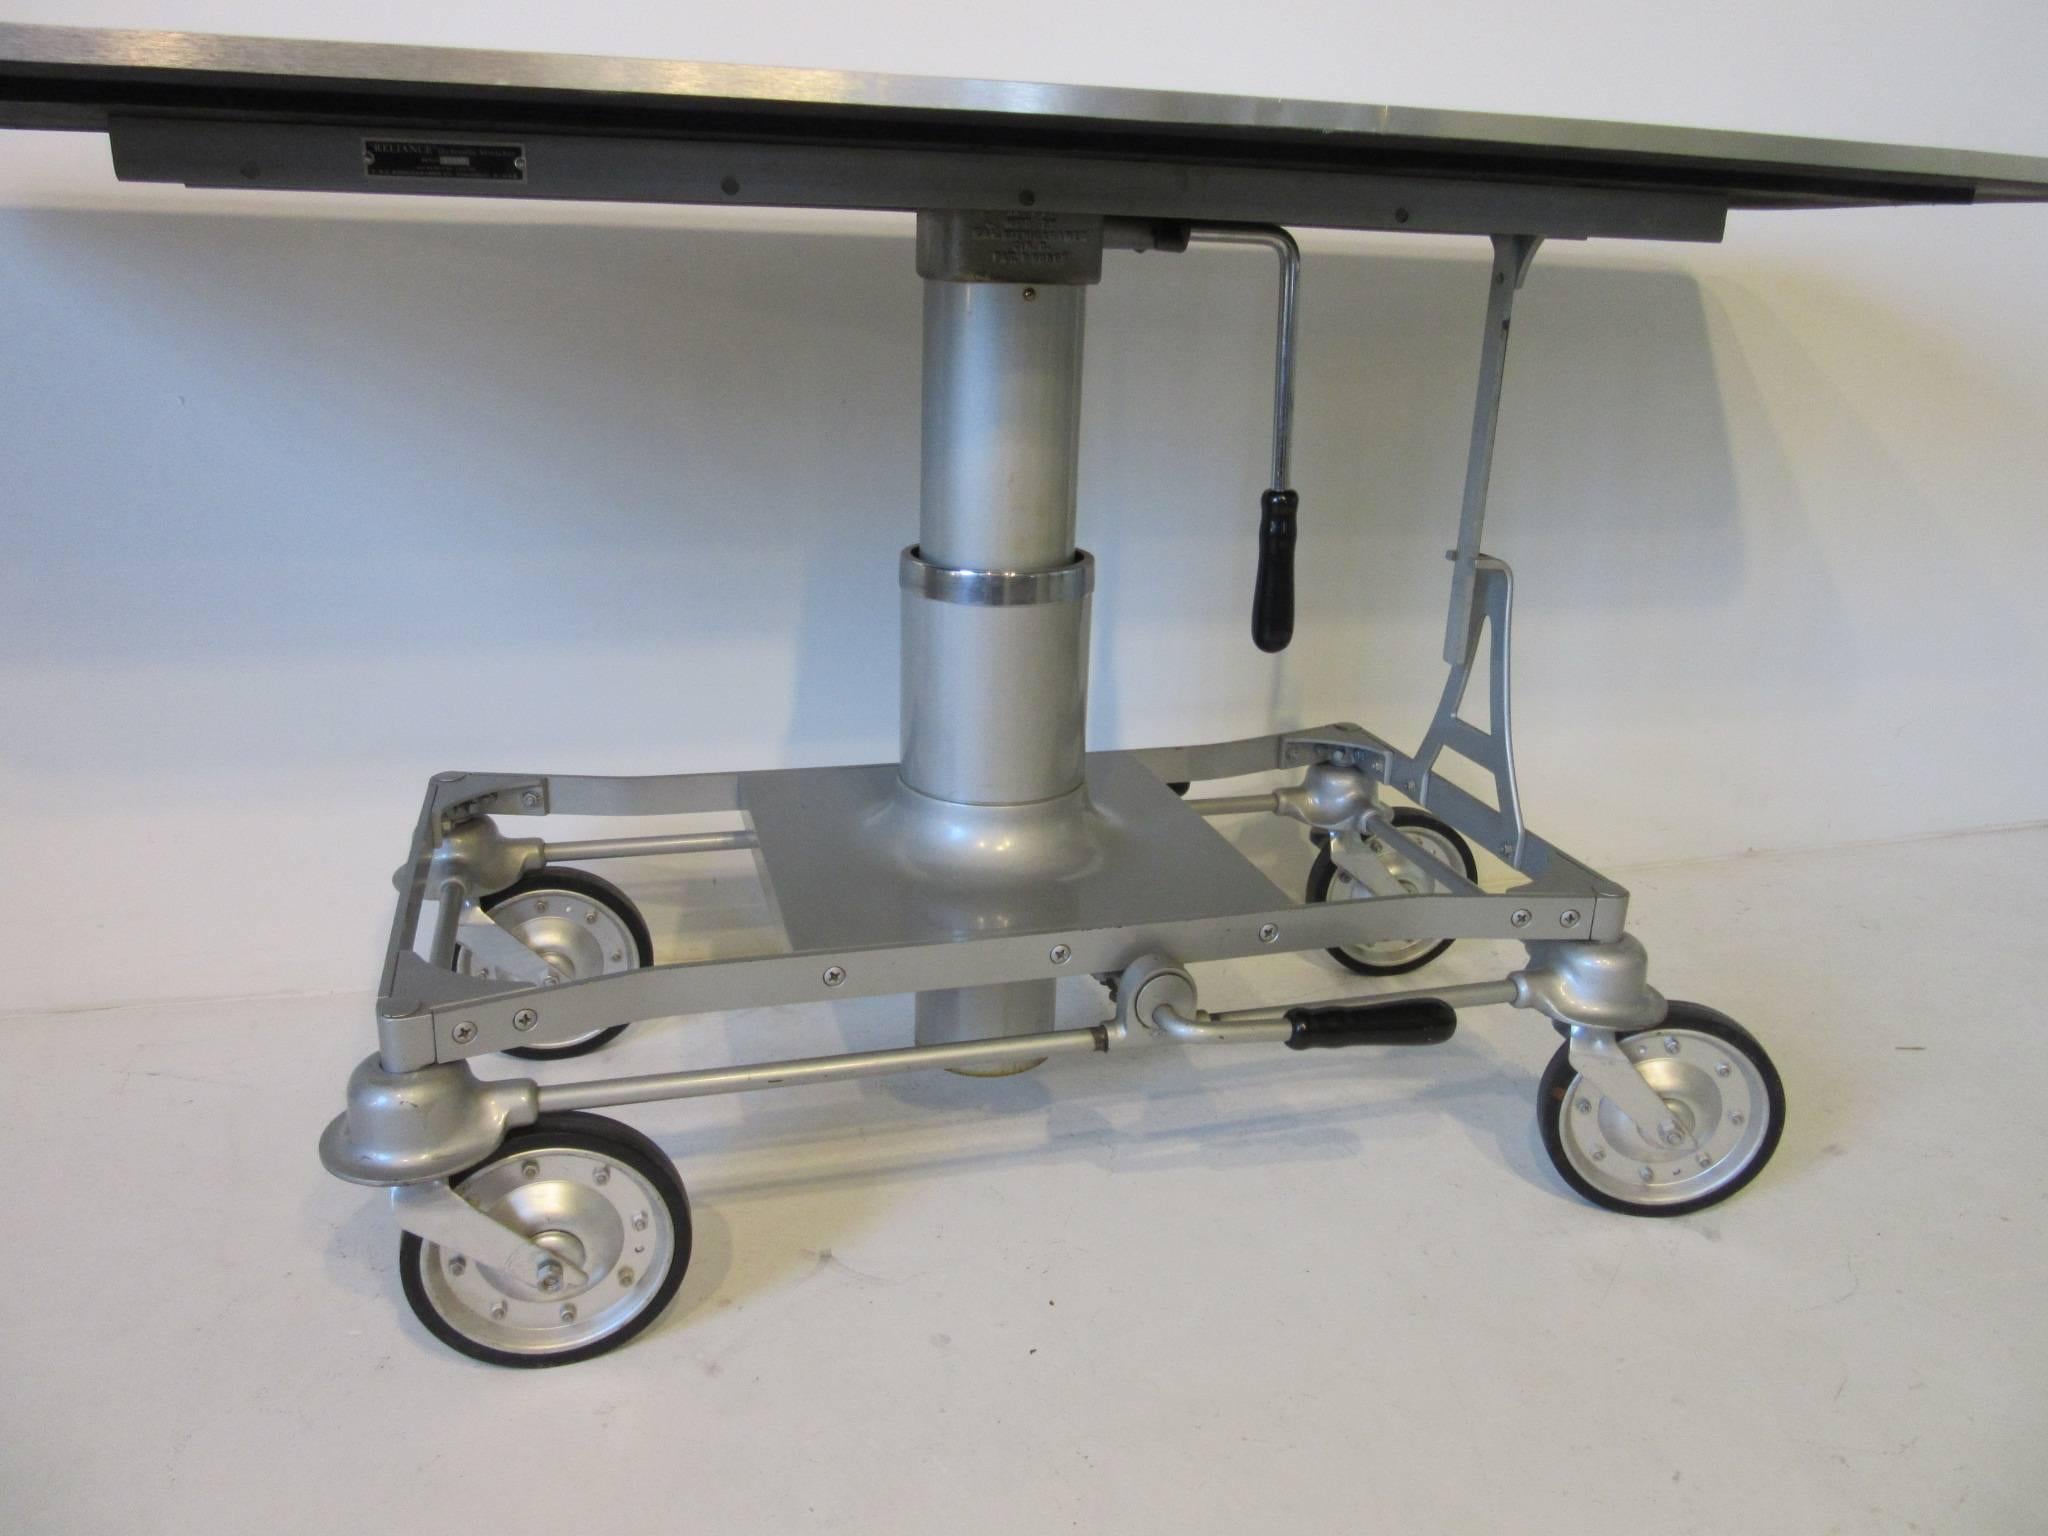 An Industrial machine age bar or serving table with large locking wheels, hydraulic pump lift unit for adjusting the height and replaced brushed stainless steel styled top. Great for the entertainment area, collector car garage or restaurant,